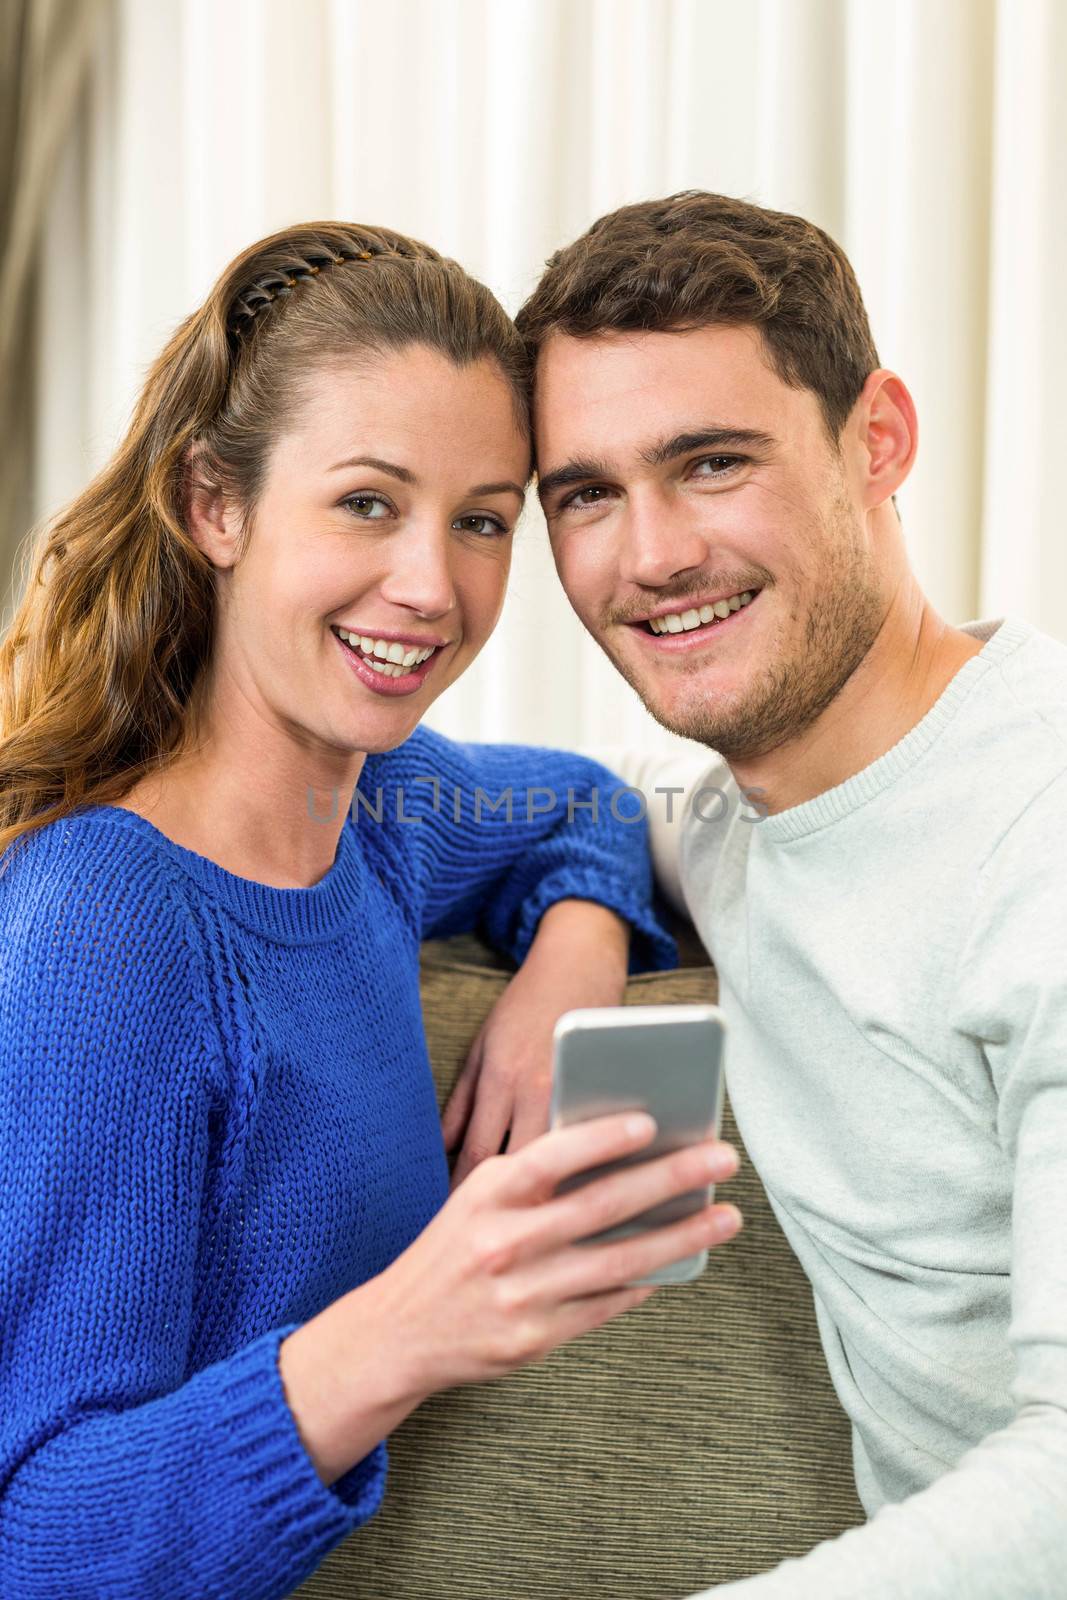 Young couple sitting on sofa and using mobile phone in living room